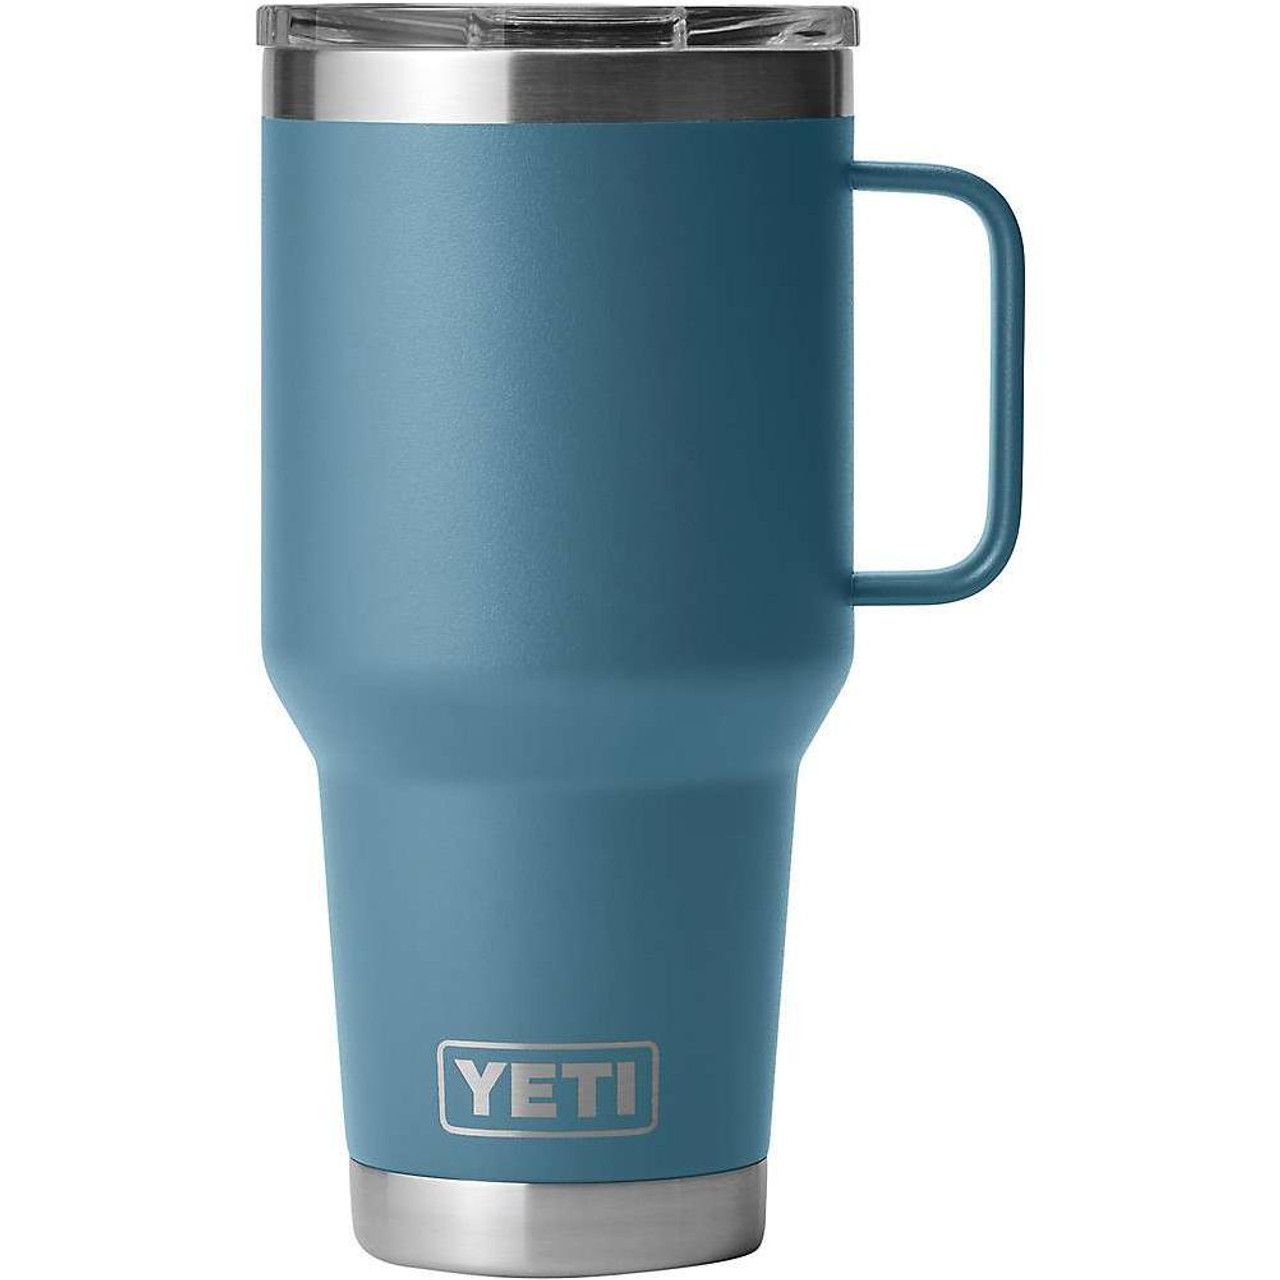 https://cdn11.bigcommerce.com/s-d4f5hm3/images/stencil/1280x1280/products/65664/155439/Yeti-Rambler-Travel-Mug-with-Stronghold-Lid-30oz-888830130759_image1__46771.1692110736.jpg?c=2